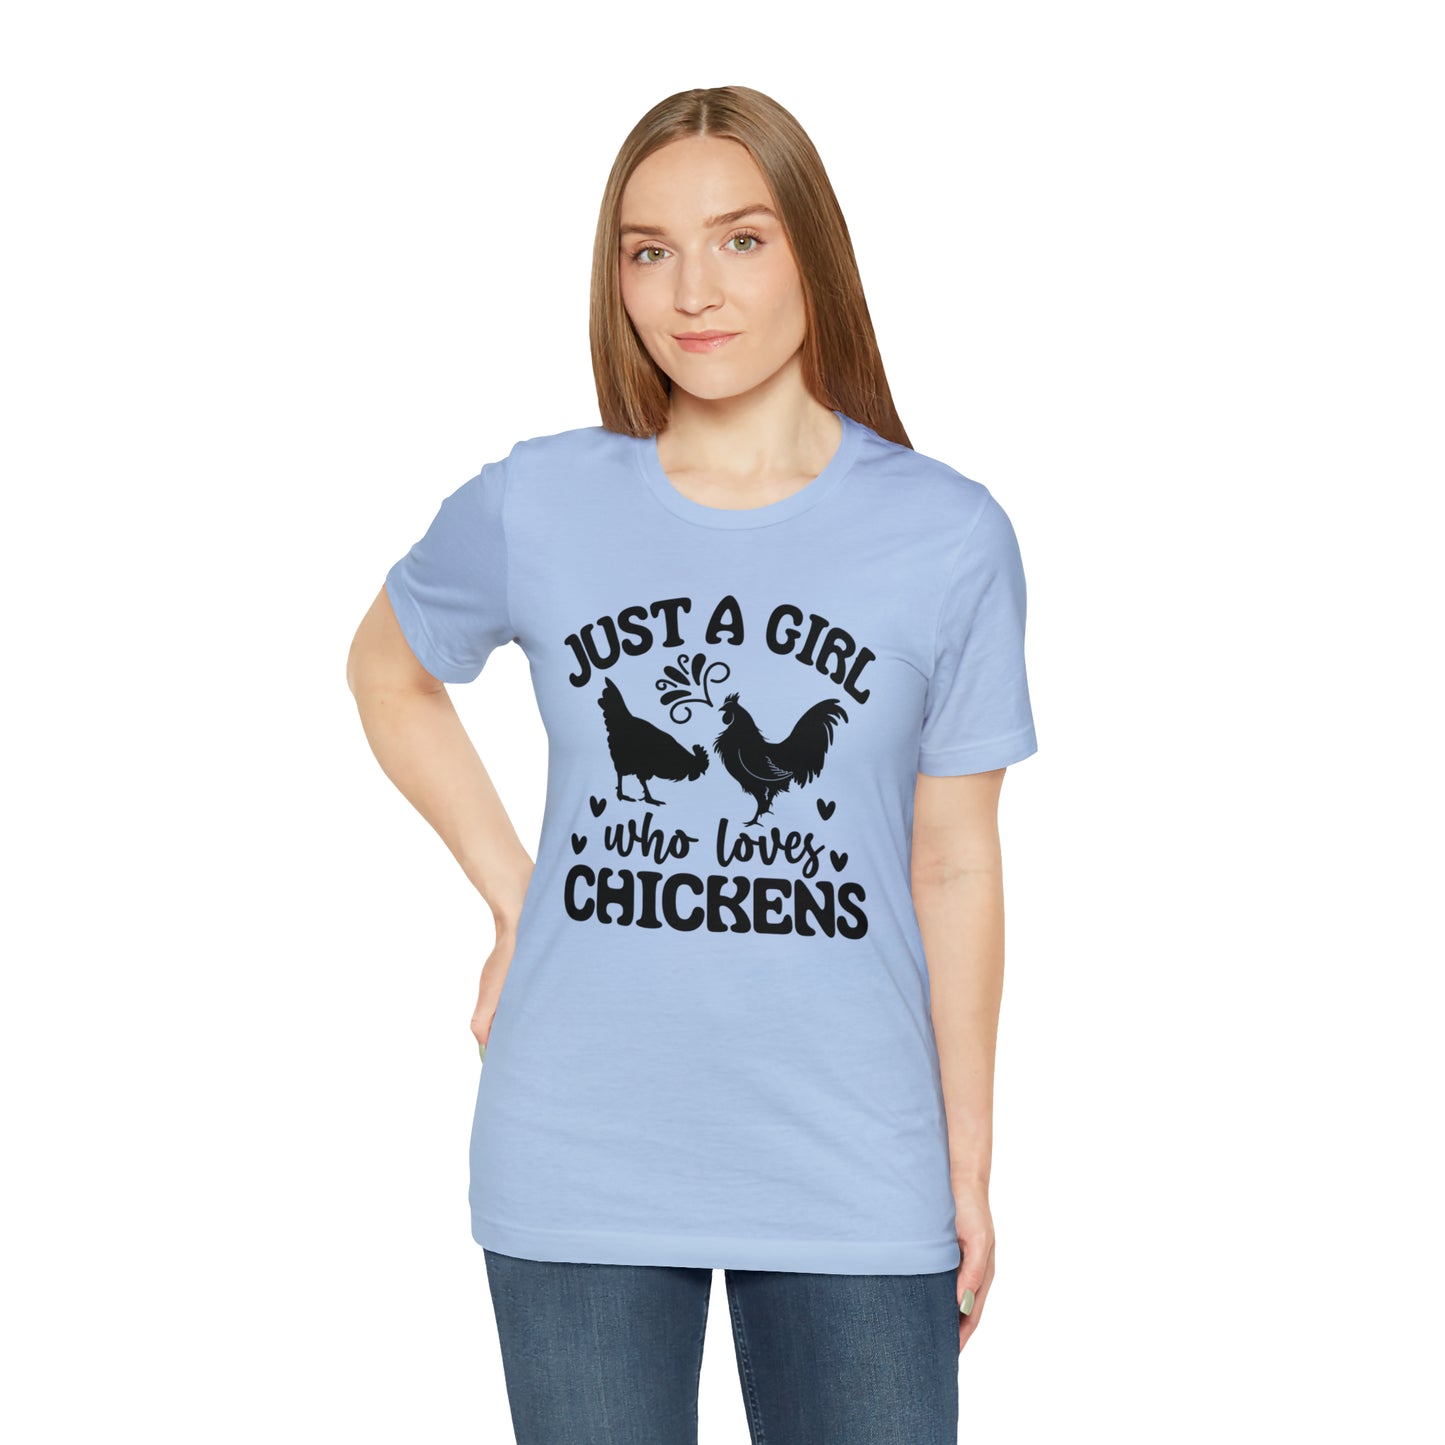 Just a Girl Who Loves Chickens Short Sleeve T-shirt